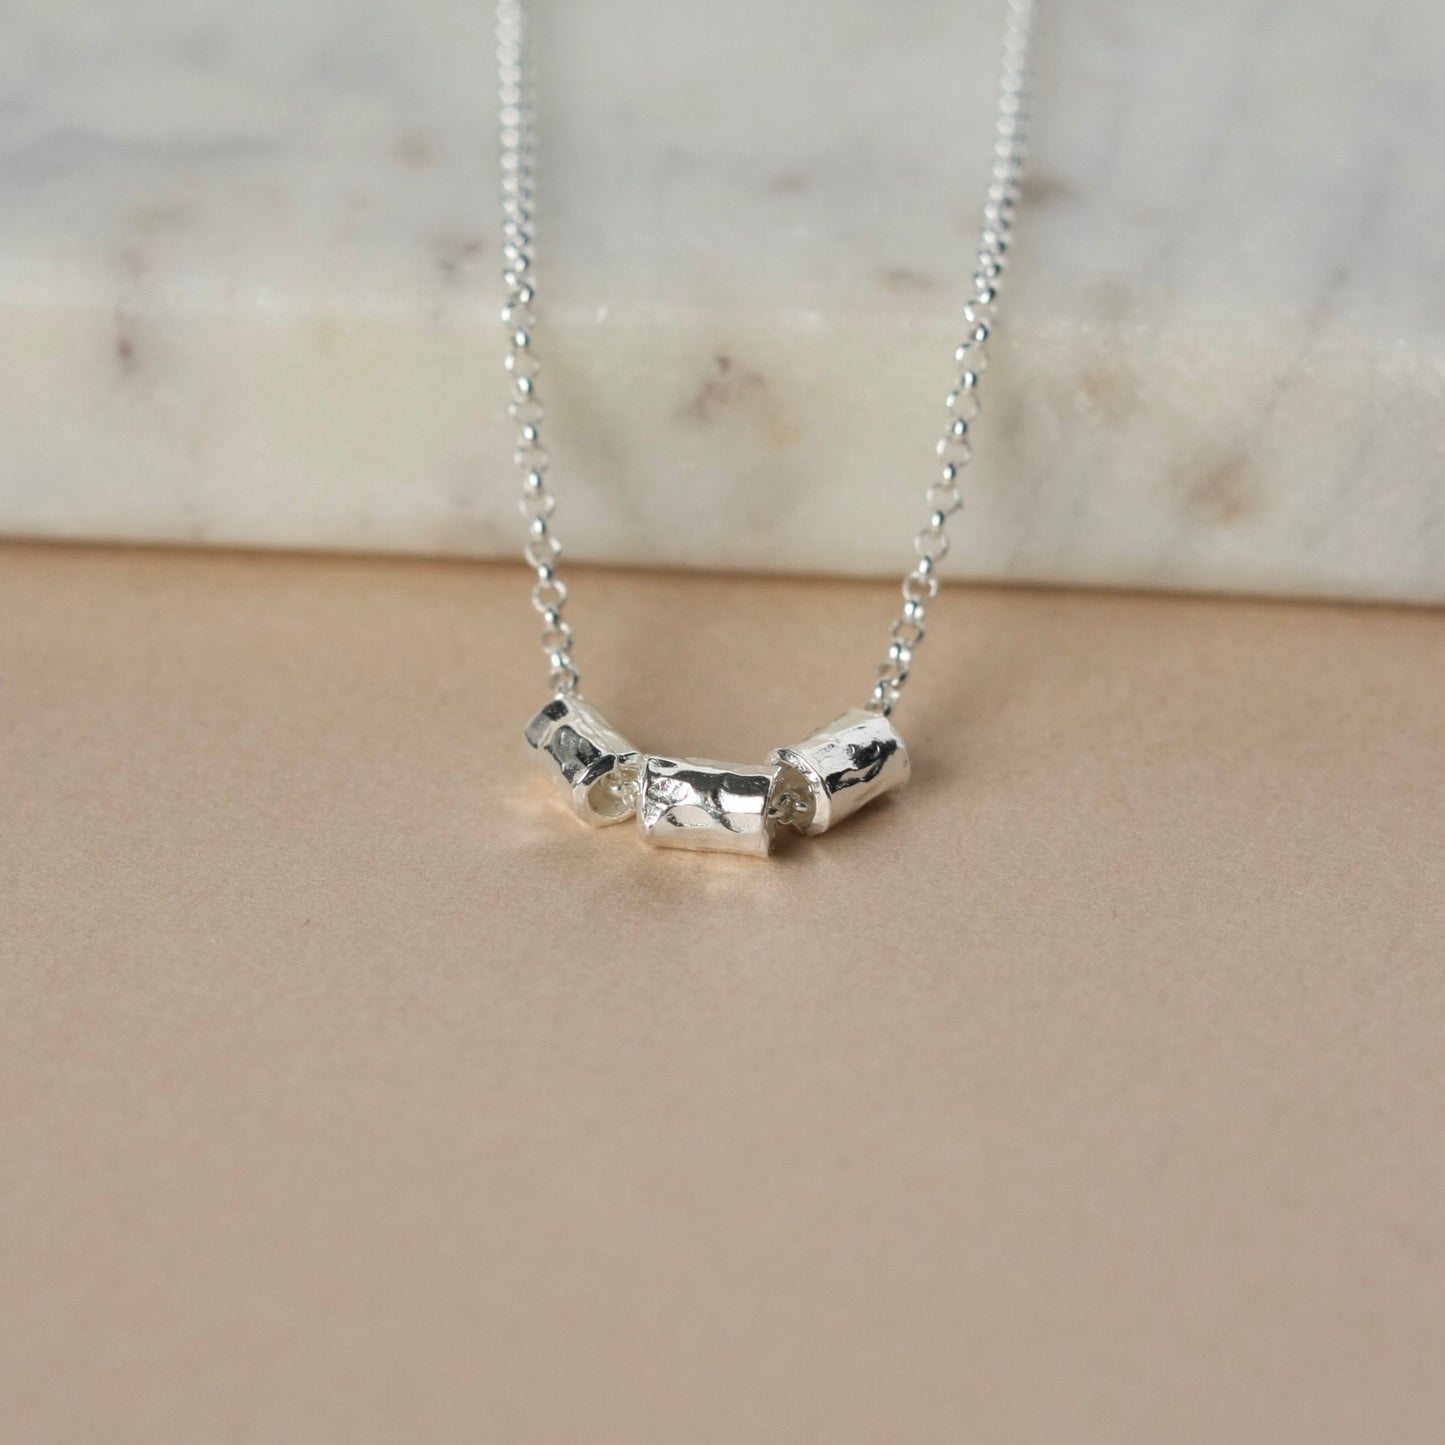 Hammered Sterling Silver Bead Necklace